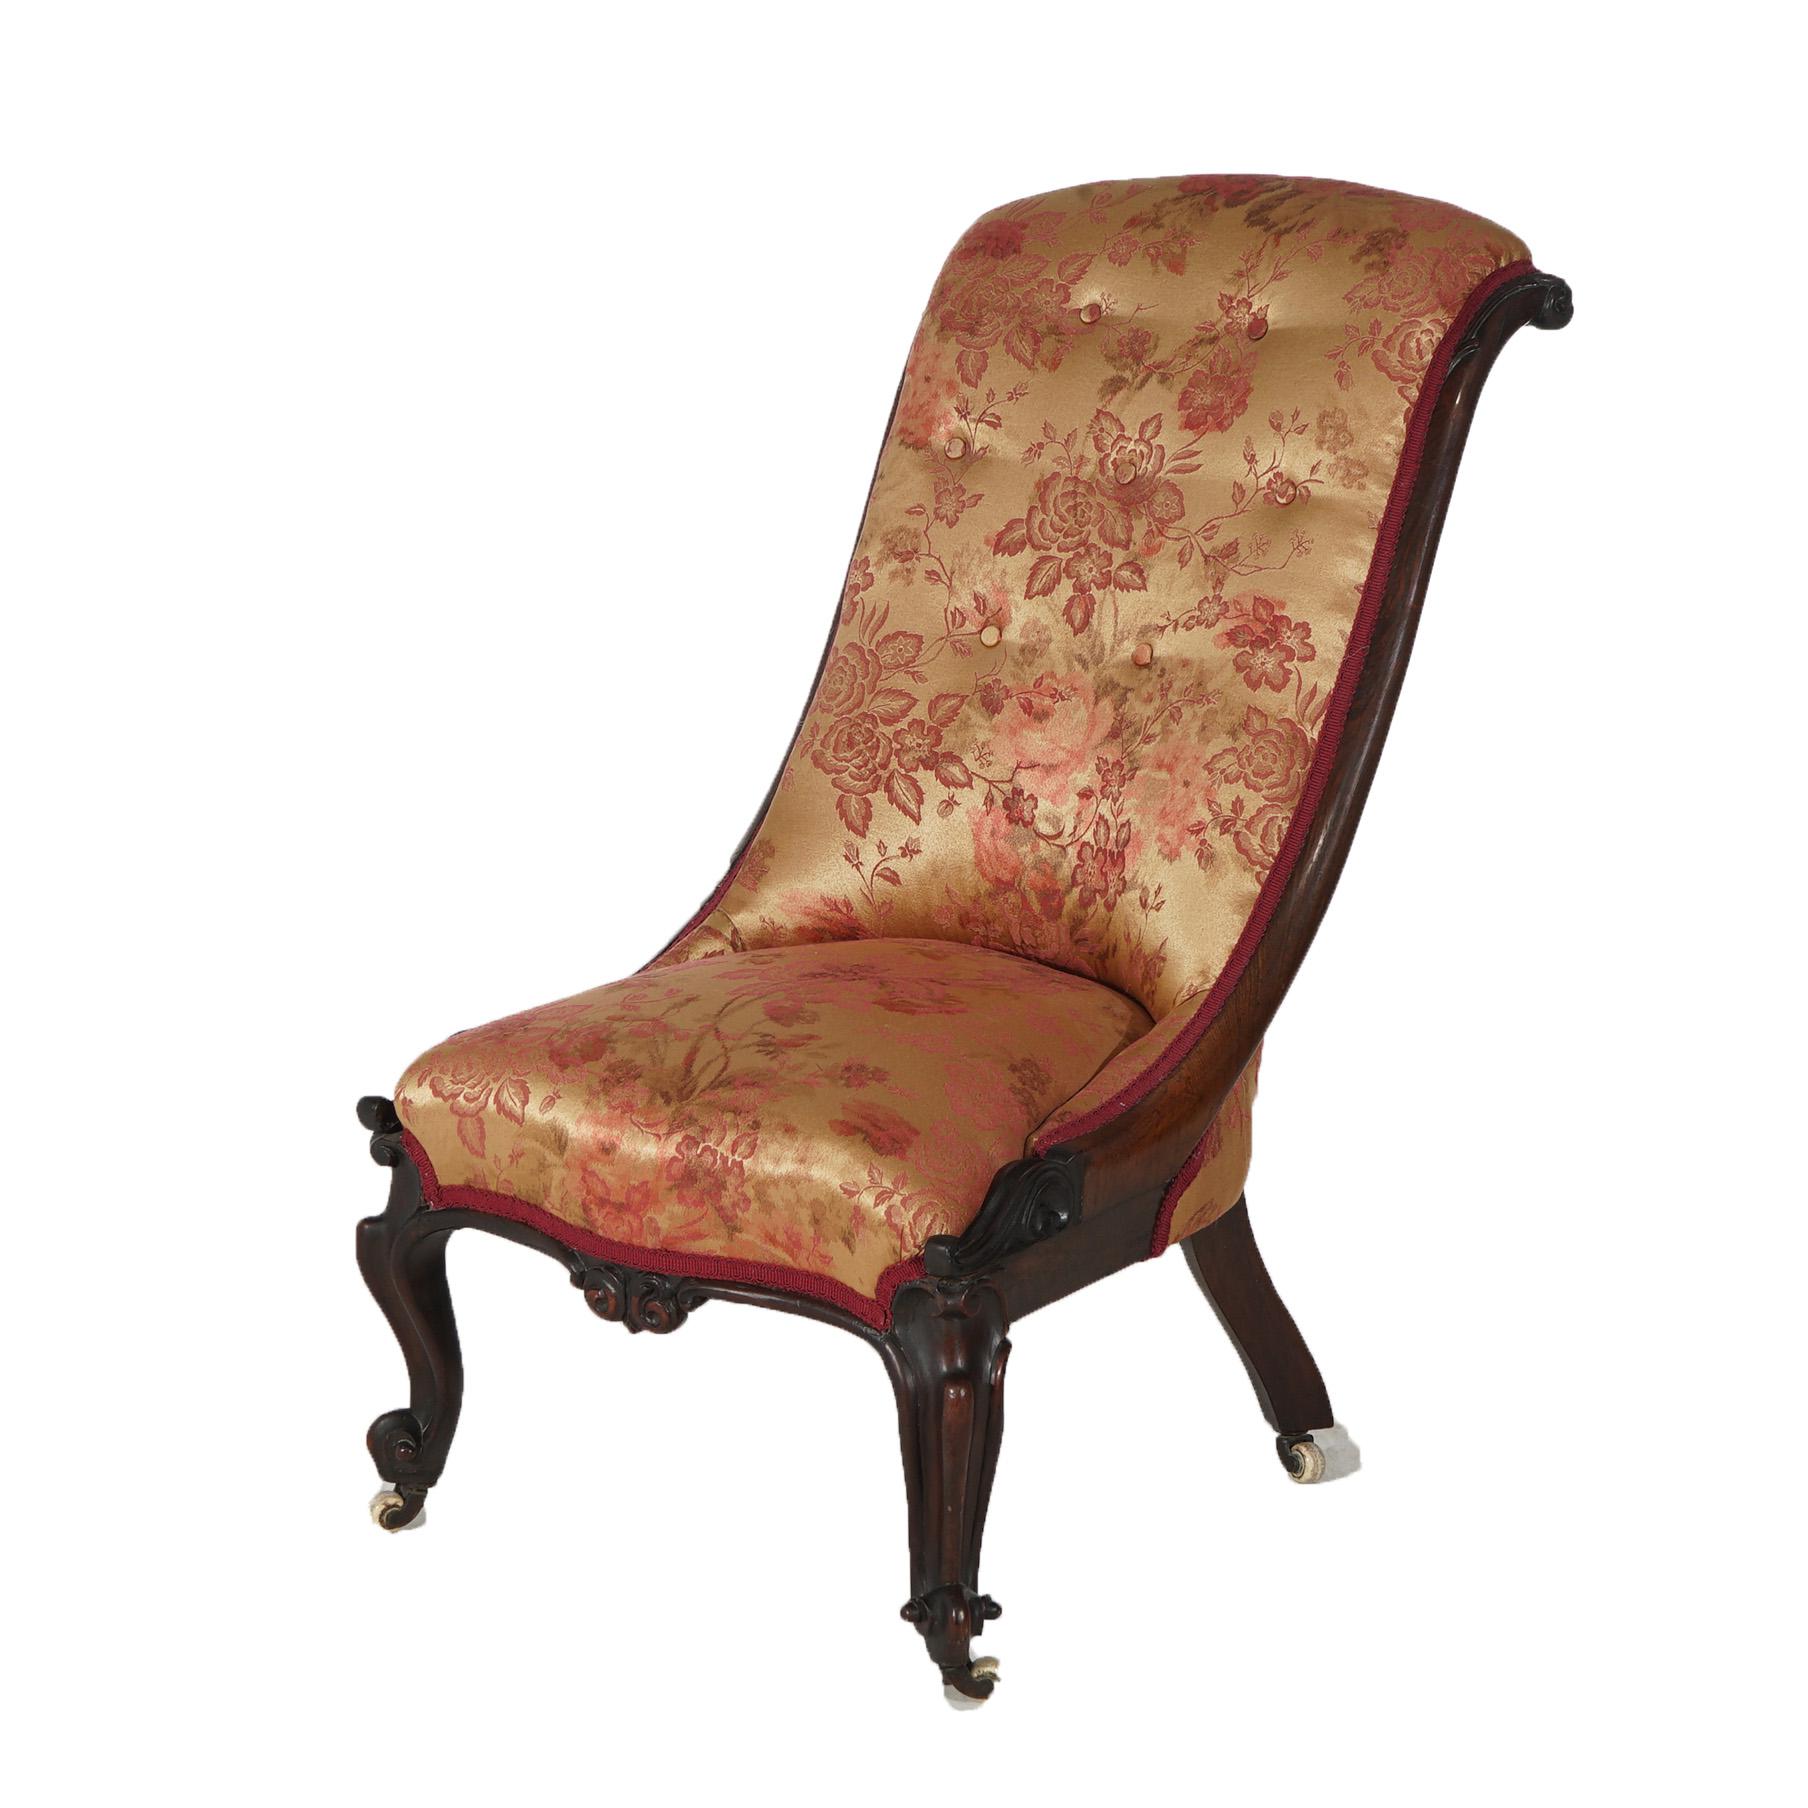 ***Ask About Reduced In-House Delivery Rates - Reliable Professional Service & Fully Insured***

Victorian Carved Walnut Lady's Button Back Upholstered Slipper Chair C1890

Measures - 35.75